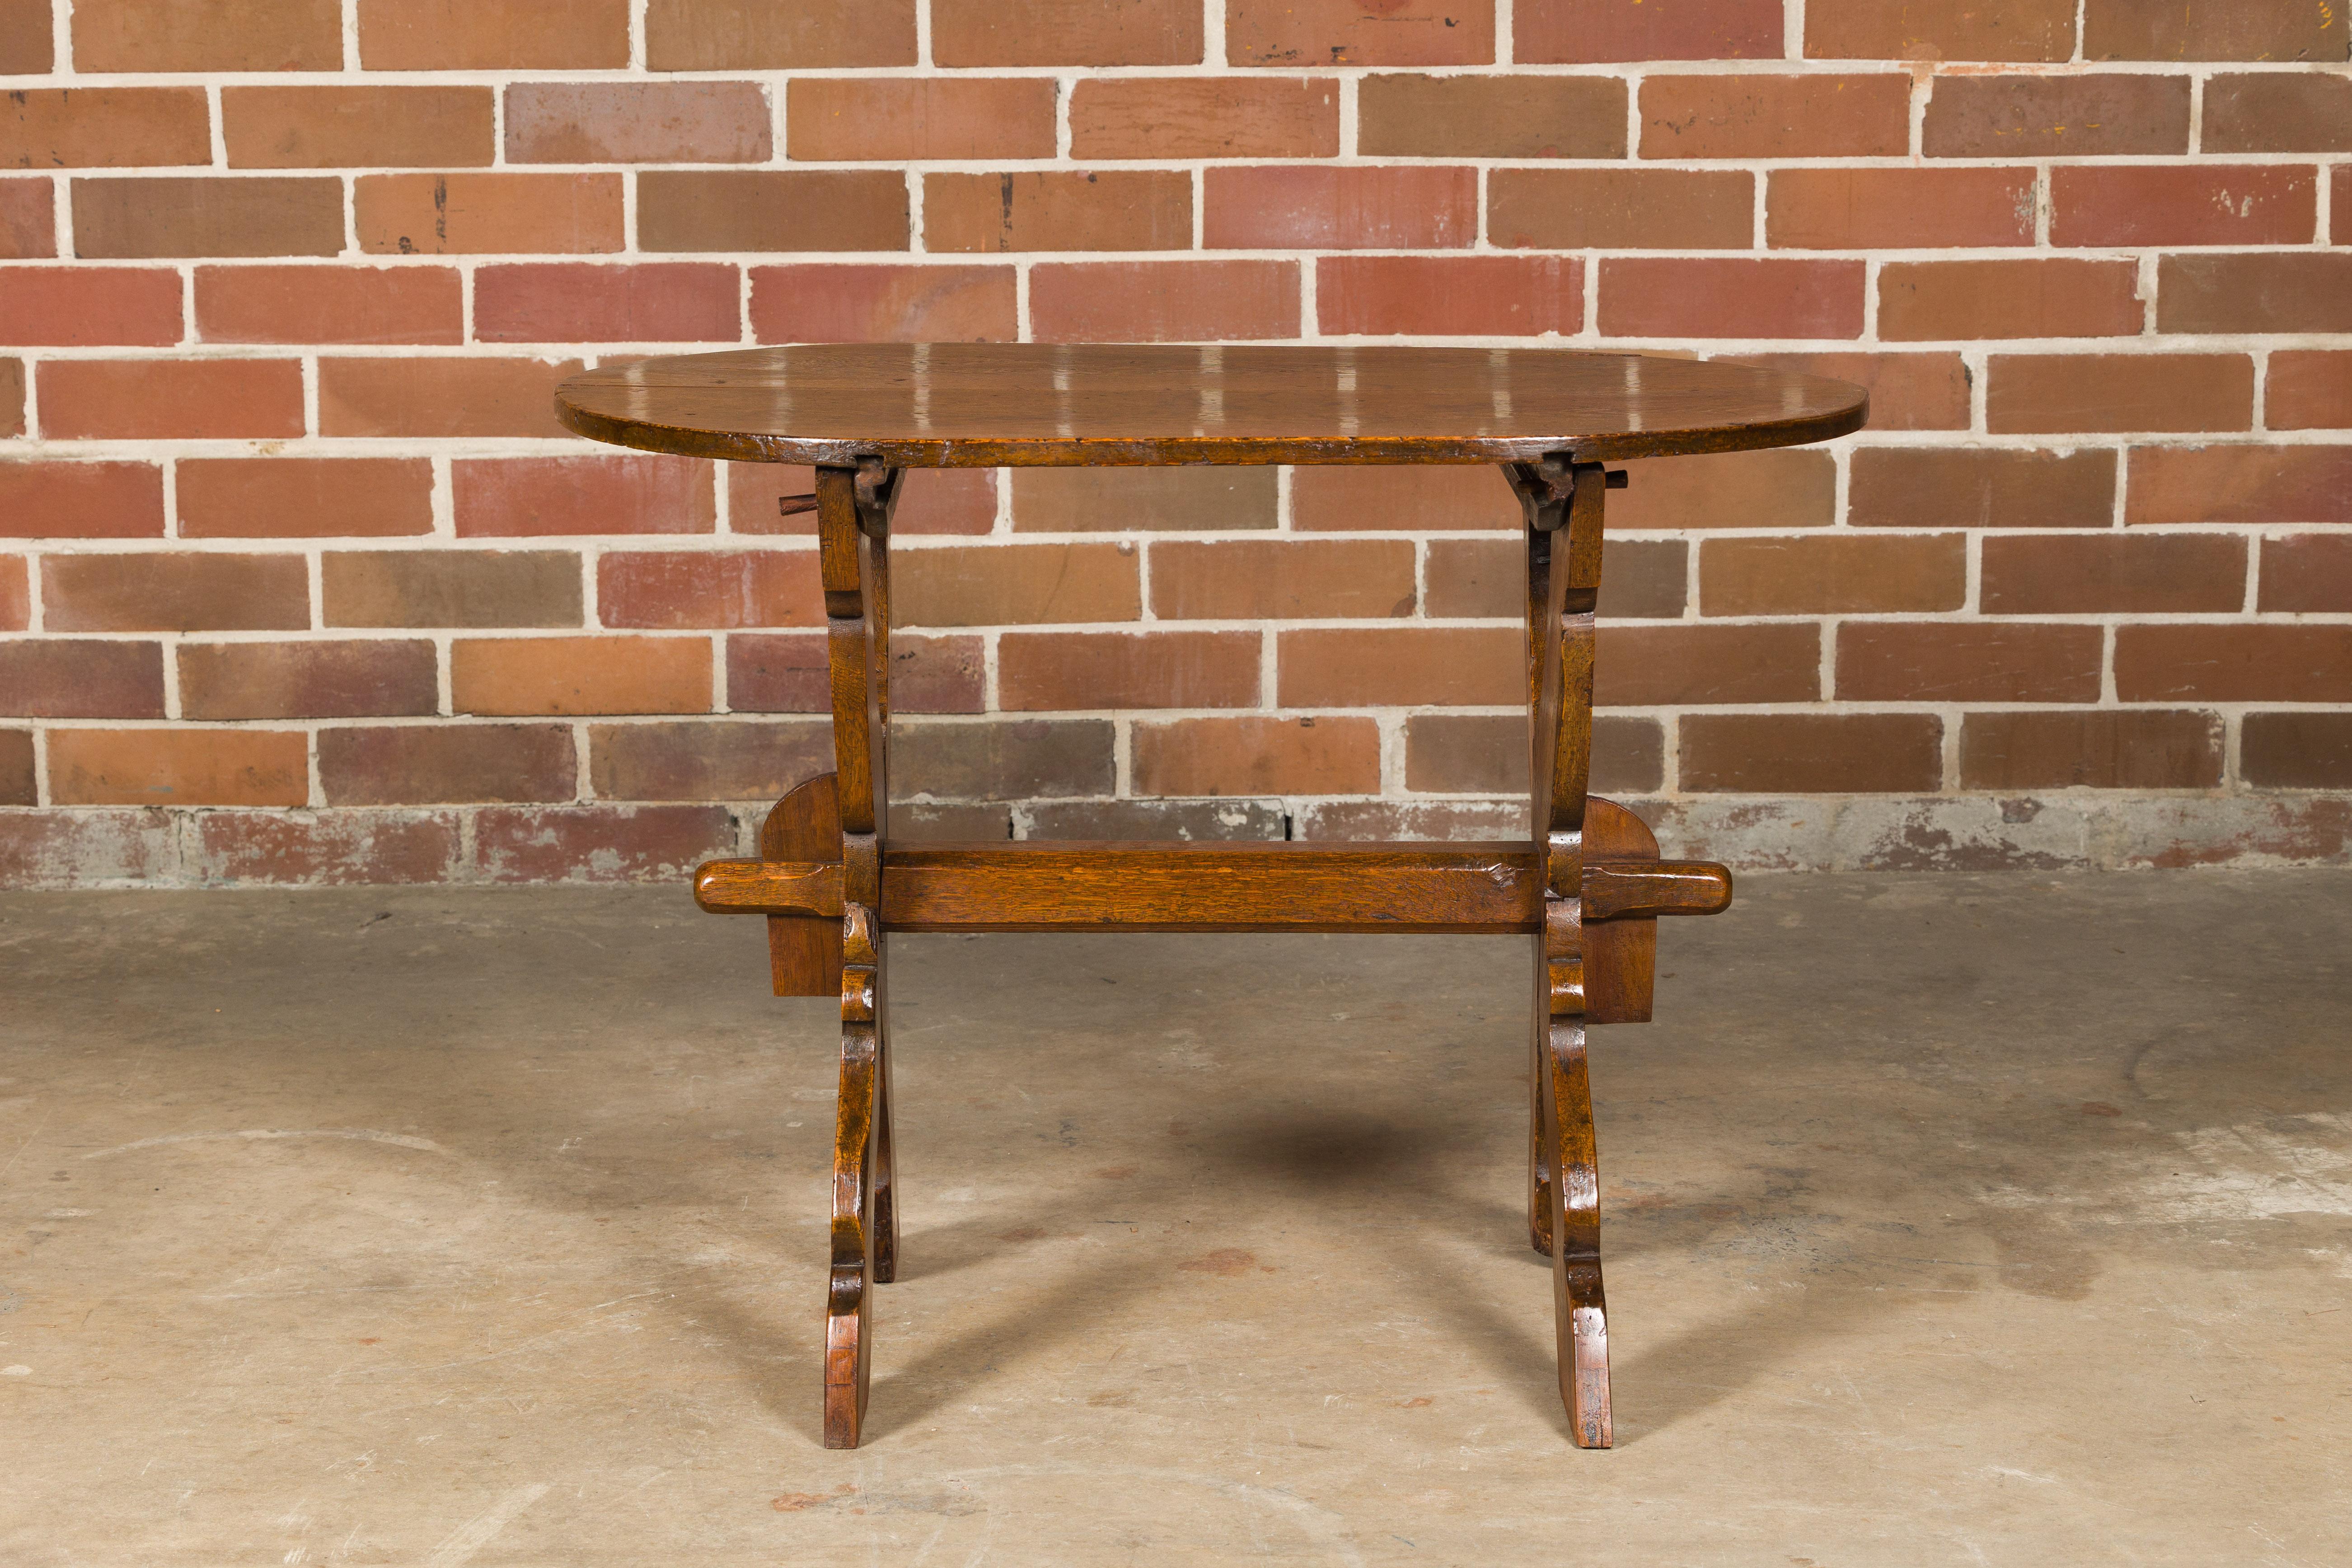 A French oak trestle side table from the 19th century with oval top, double X-Form carved base and cross stretcher. This 19th-century French oak side table exudes rustic elegance with its timeless design and exceptional craftsmanship. The oval top